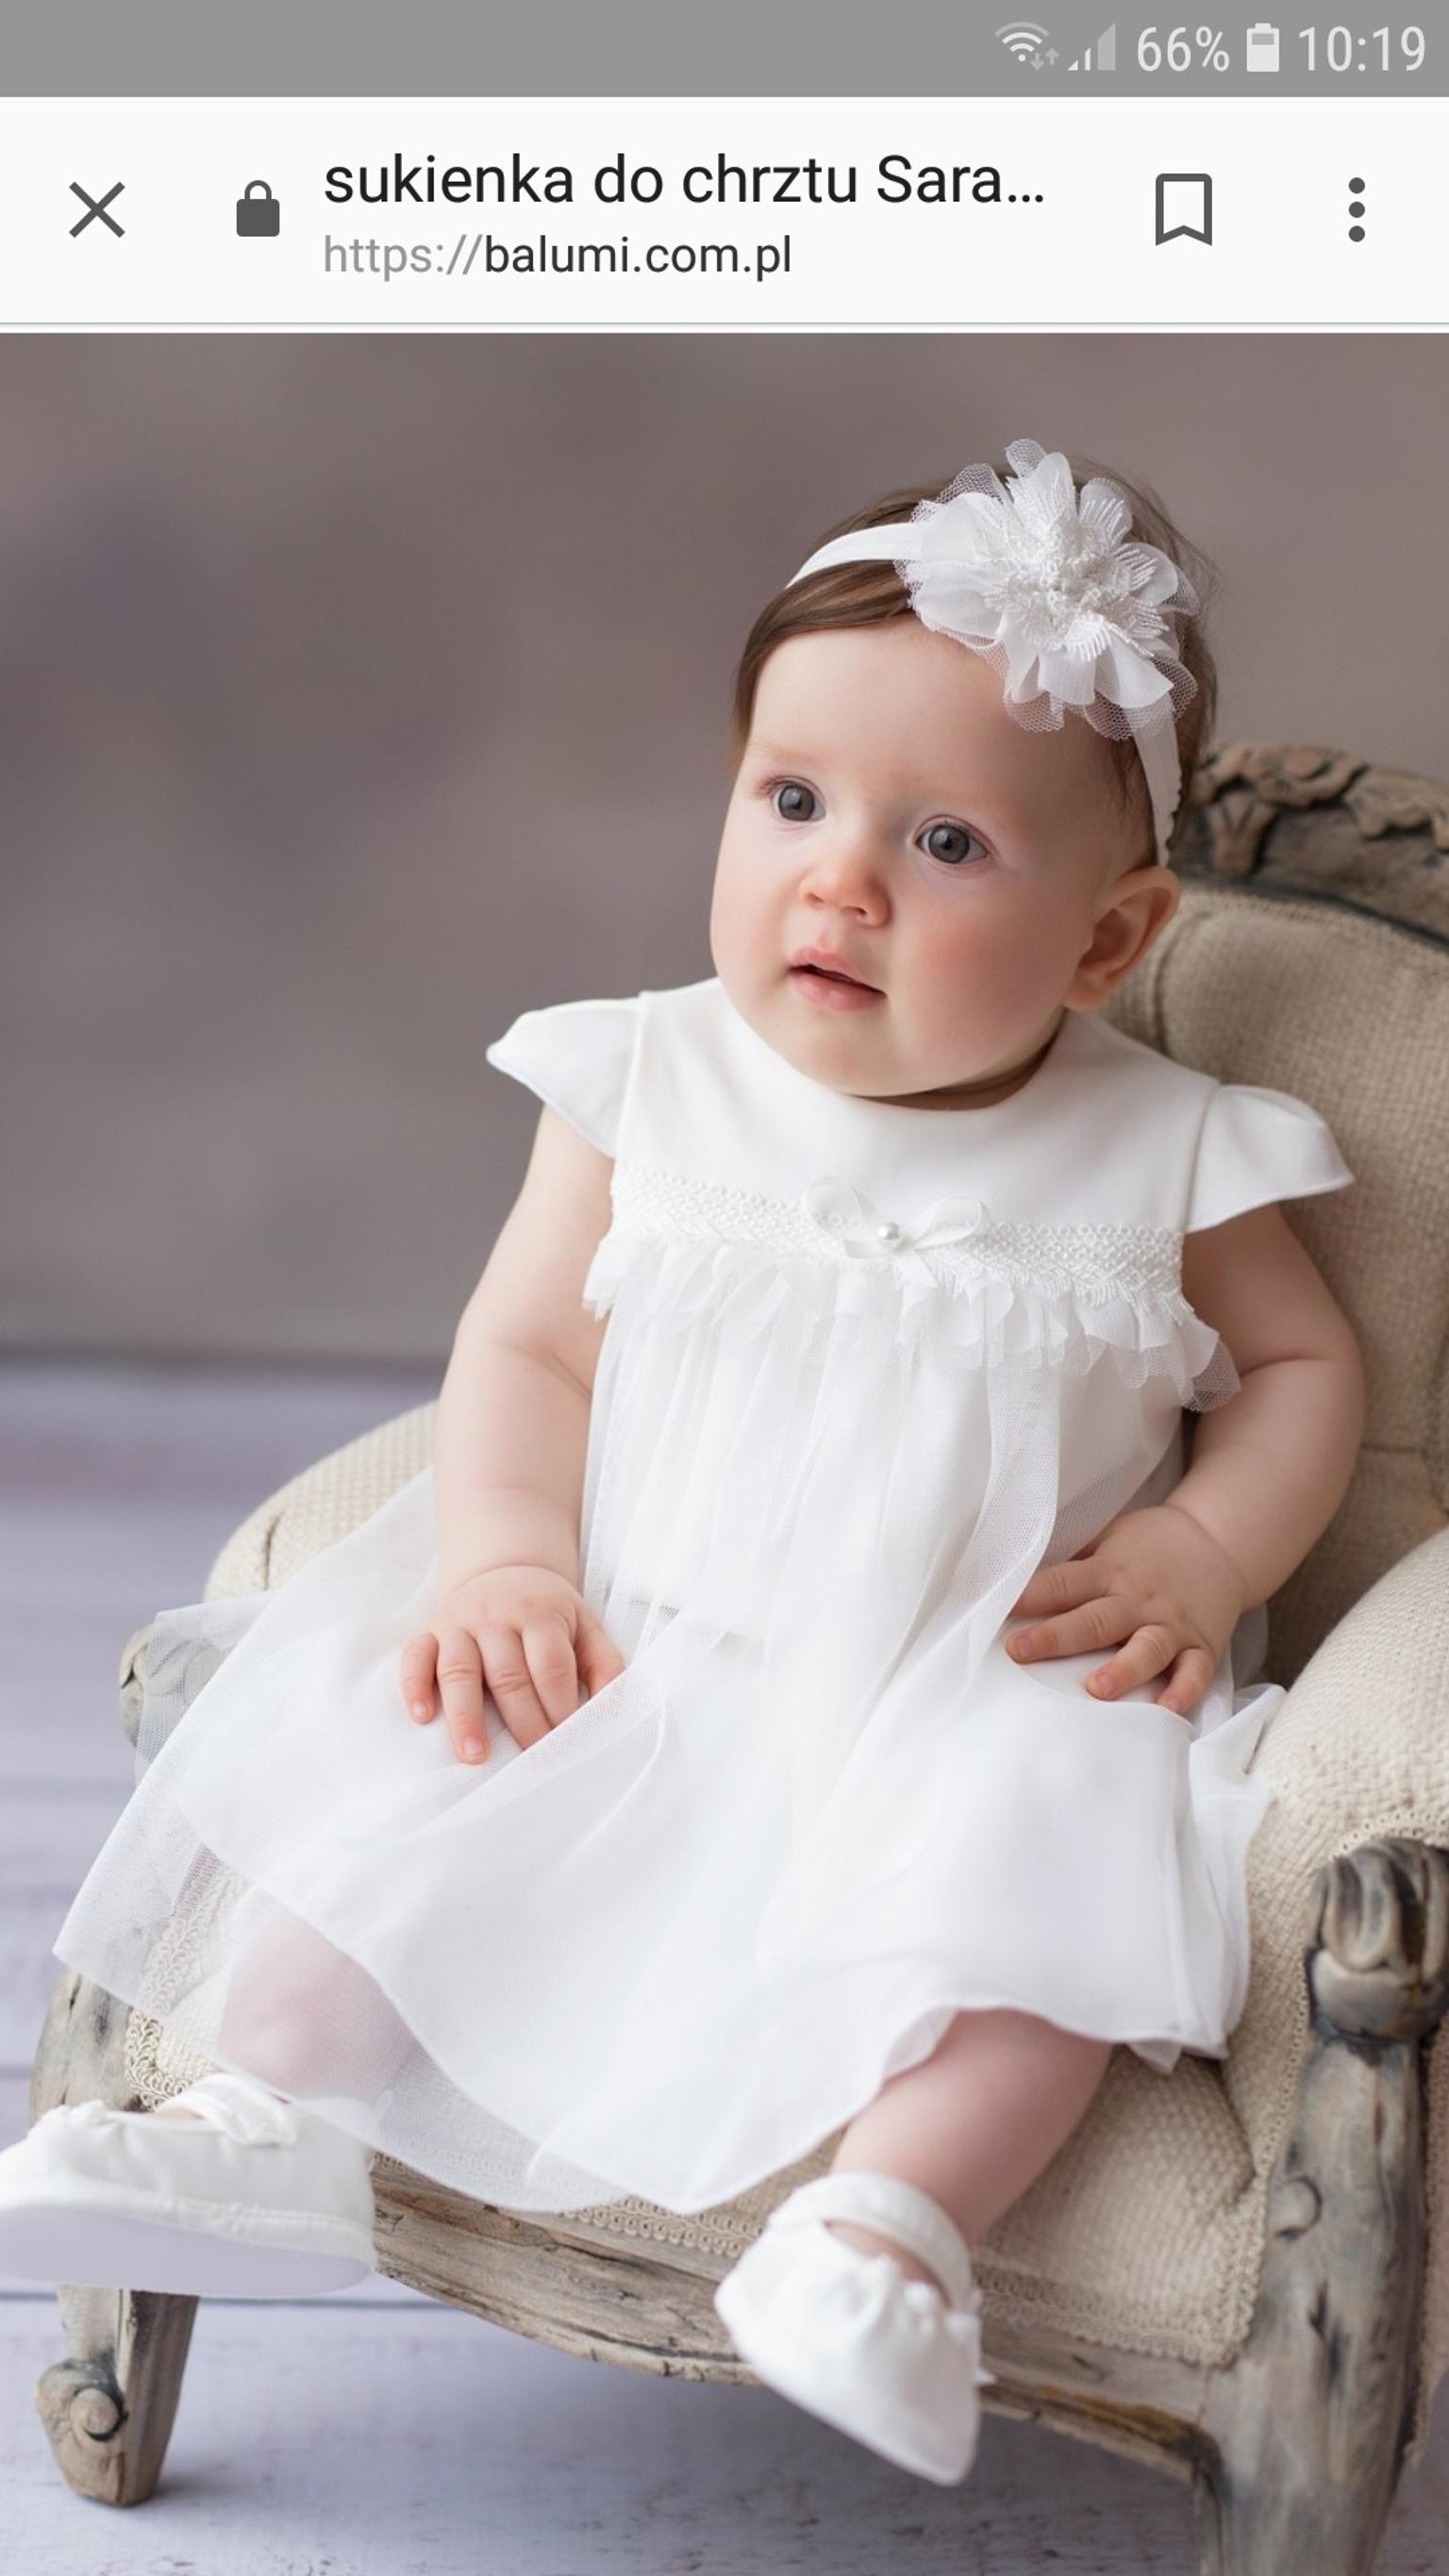 3 month old baby girl wedding outfit